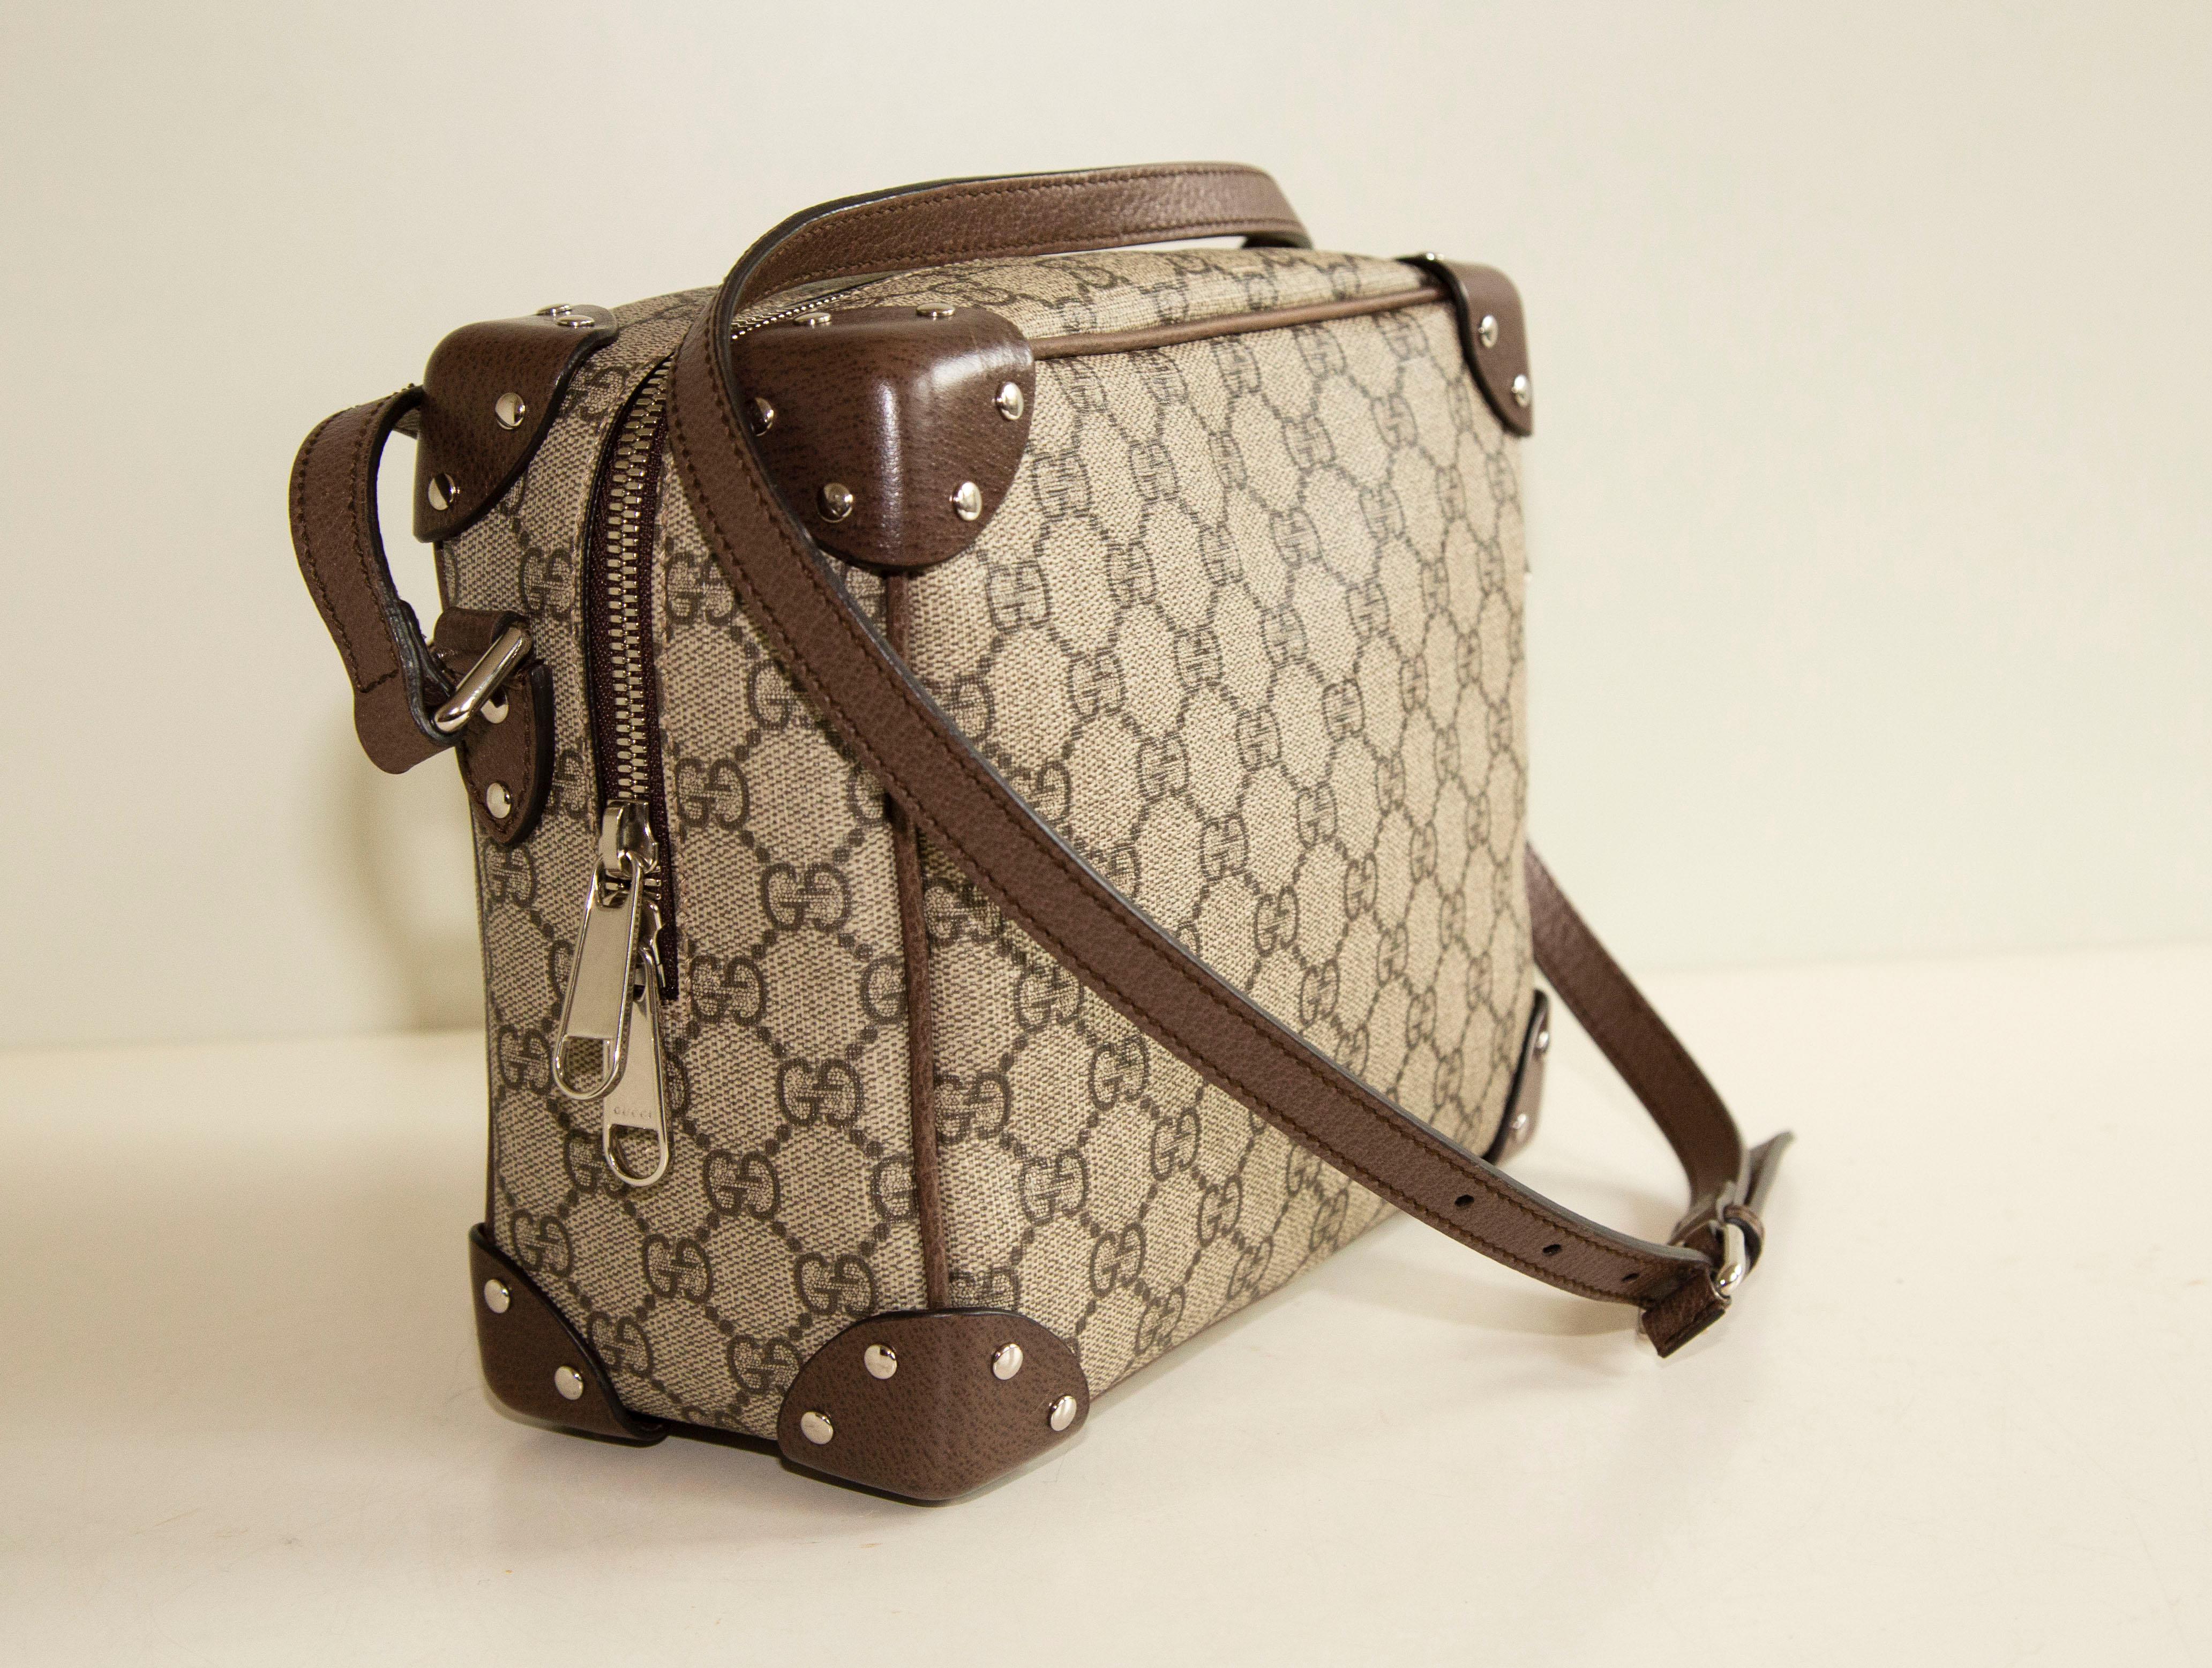 Gucci GG Supreme Monogram Square Shoulder Bag in Beige and New Acero. The bag is made of Broen Gucci GG supreme monogram canvas and finished with brown leather trim and silver toned hardware. The interior is lined with dark red fabric, and next to